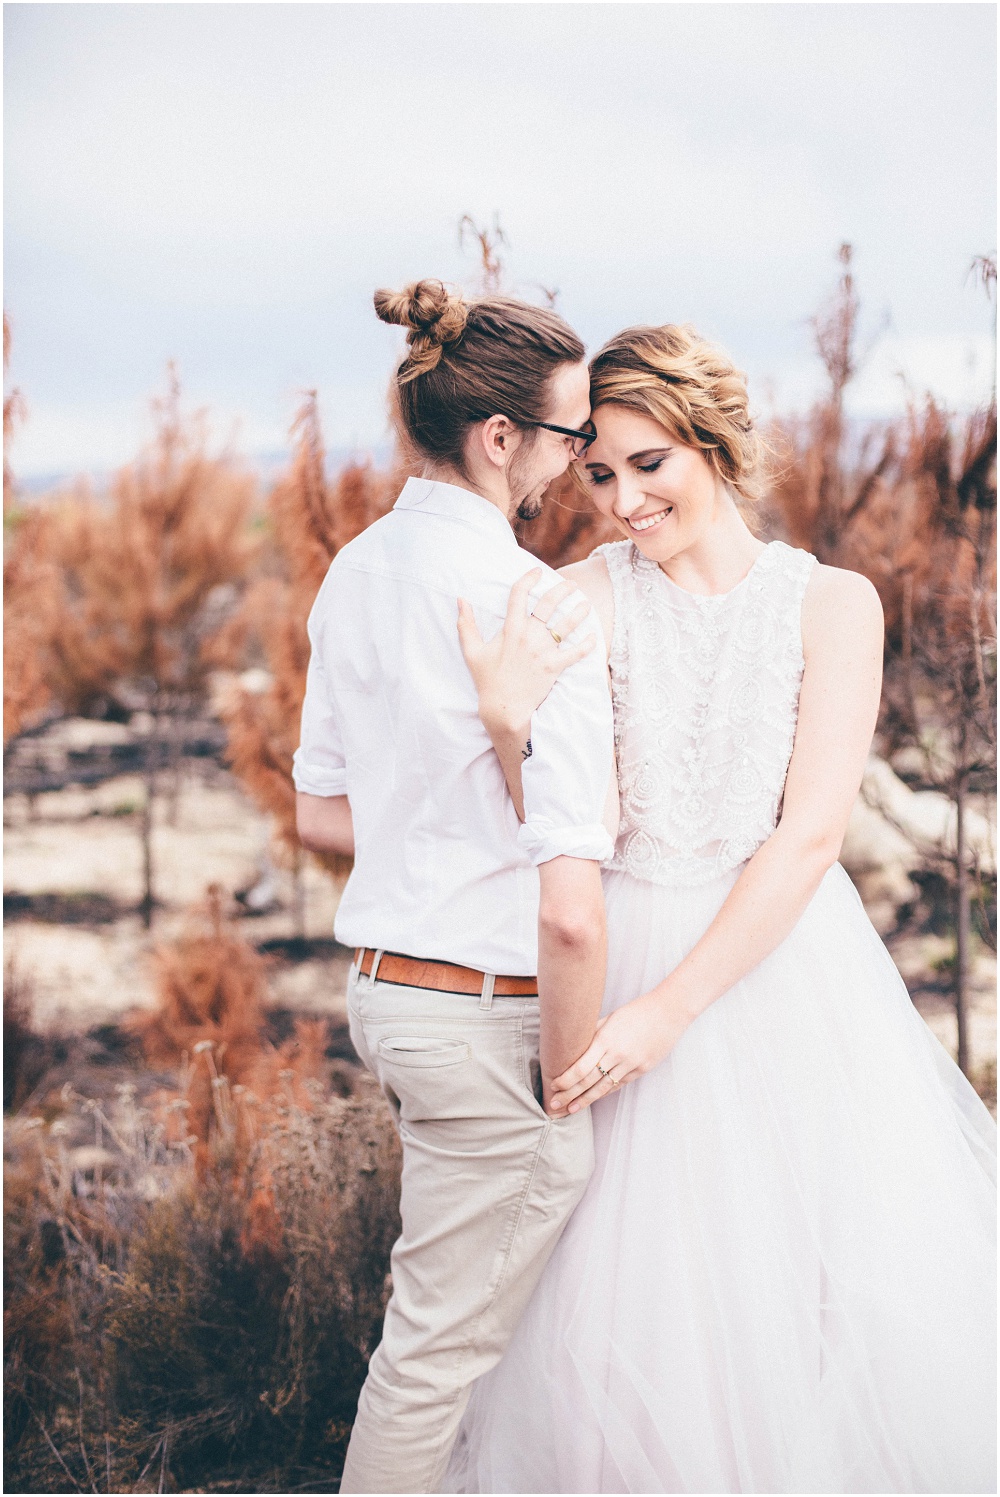 Ronel Kruger Cape Town Wedding and Lifestyle Photographer_4002.jpg